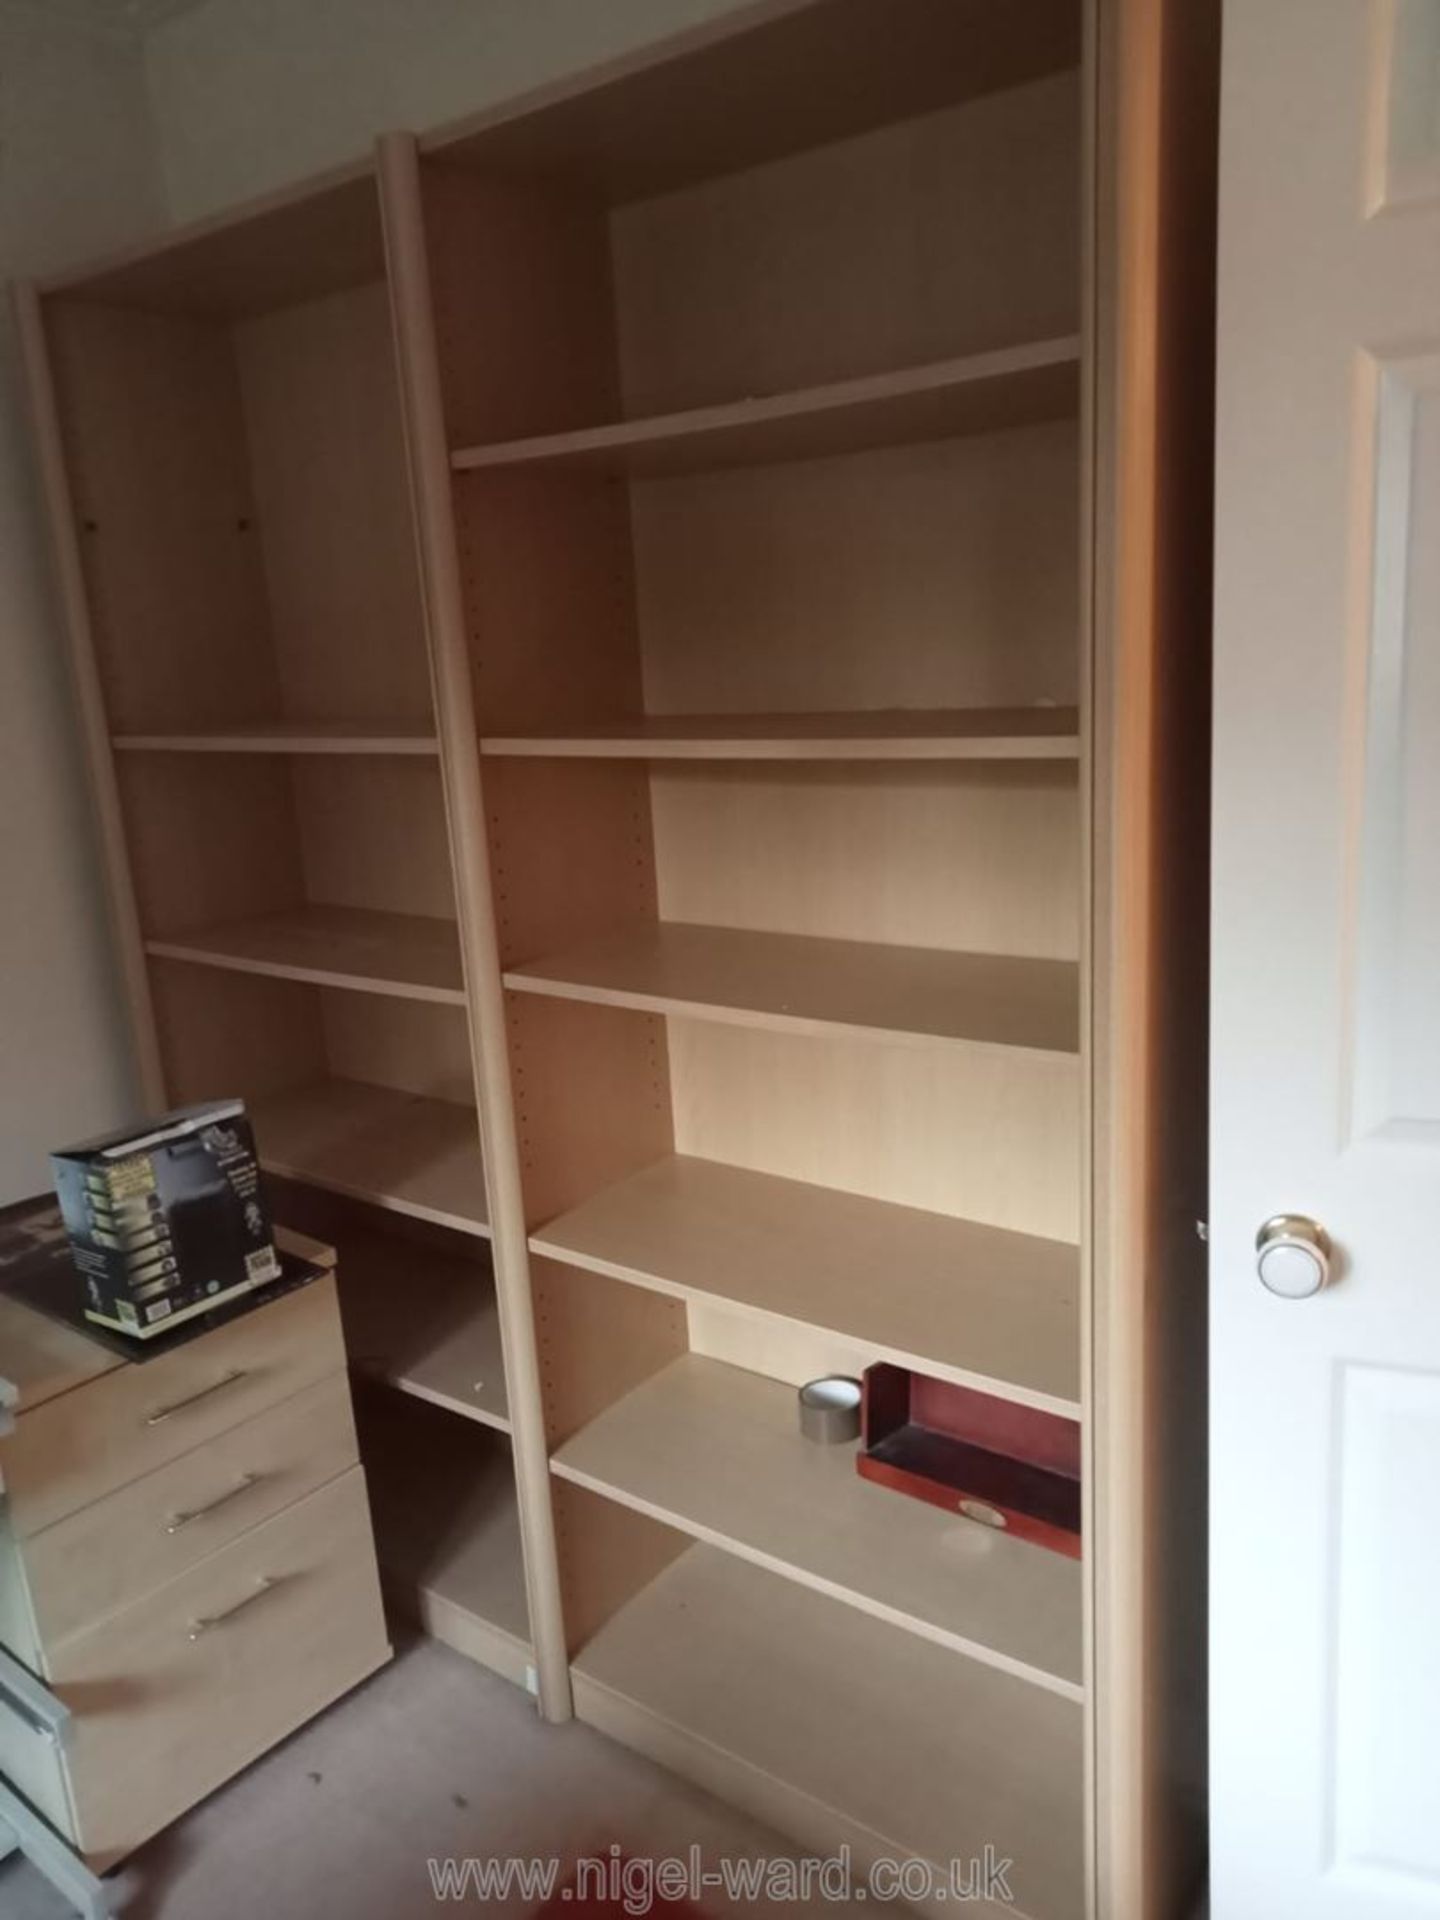 Two flat pack book shelves with adjustable shelves, 33" wide x 78" high x 13 3/4" deep.